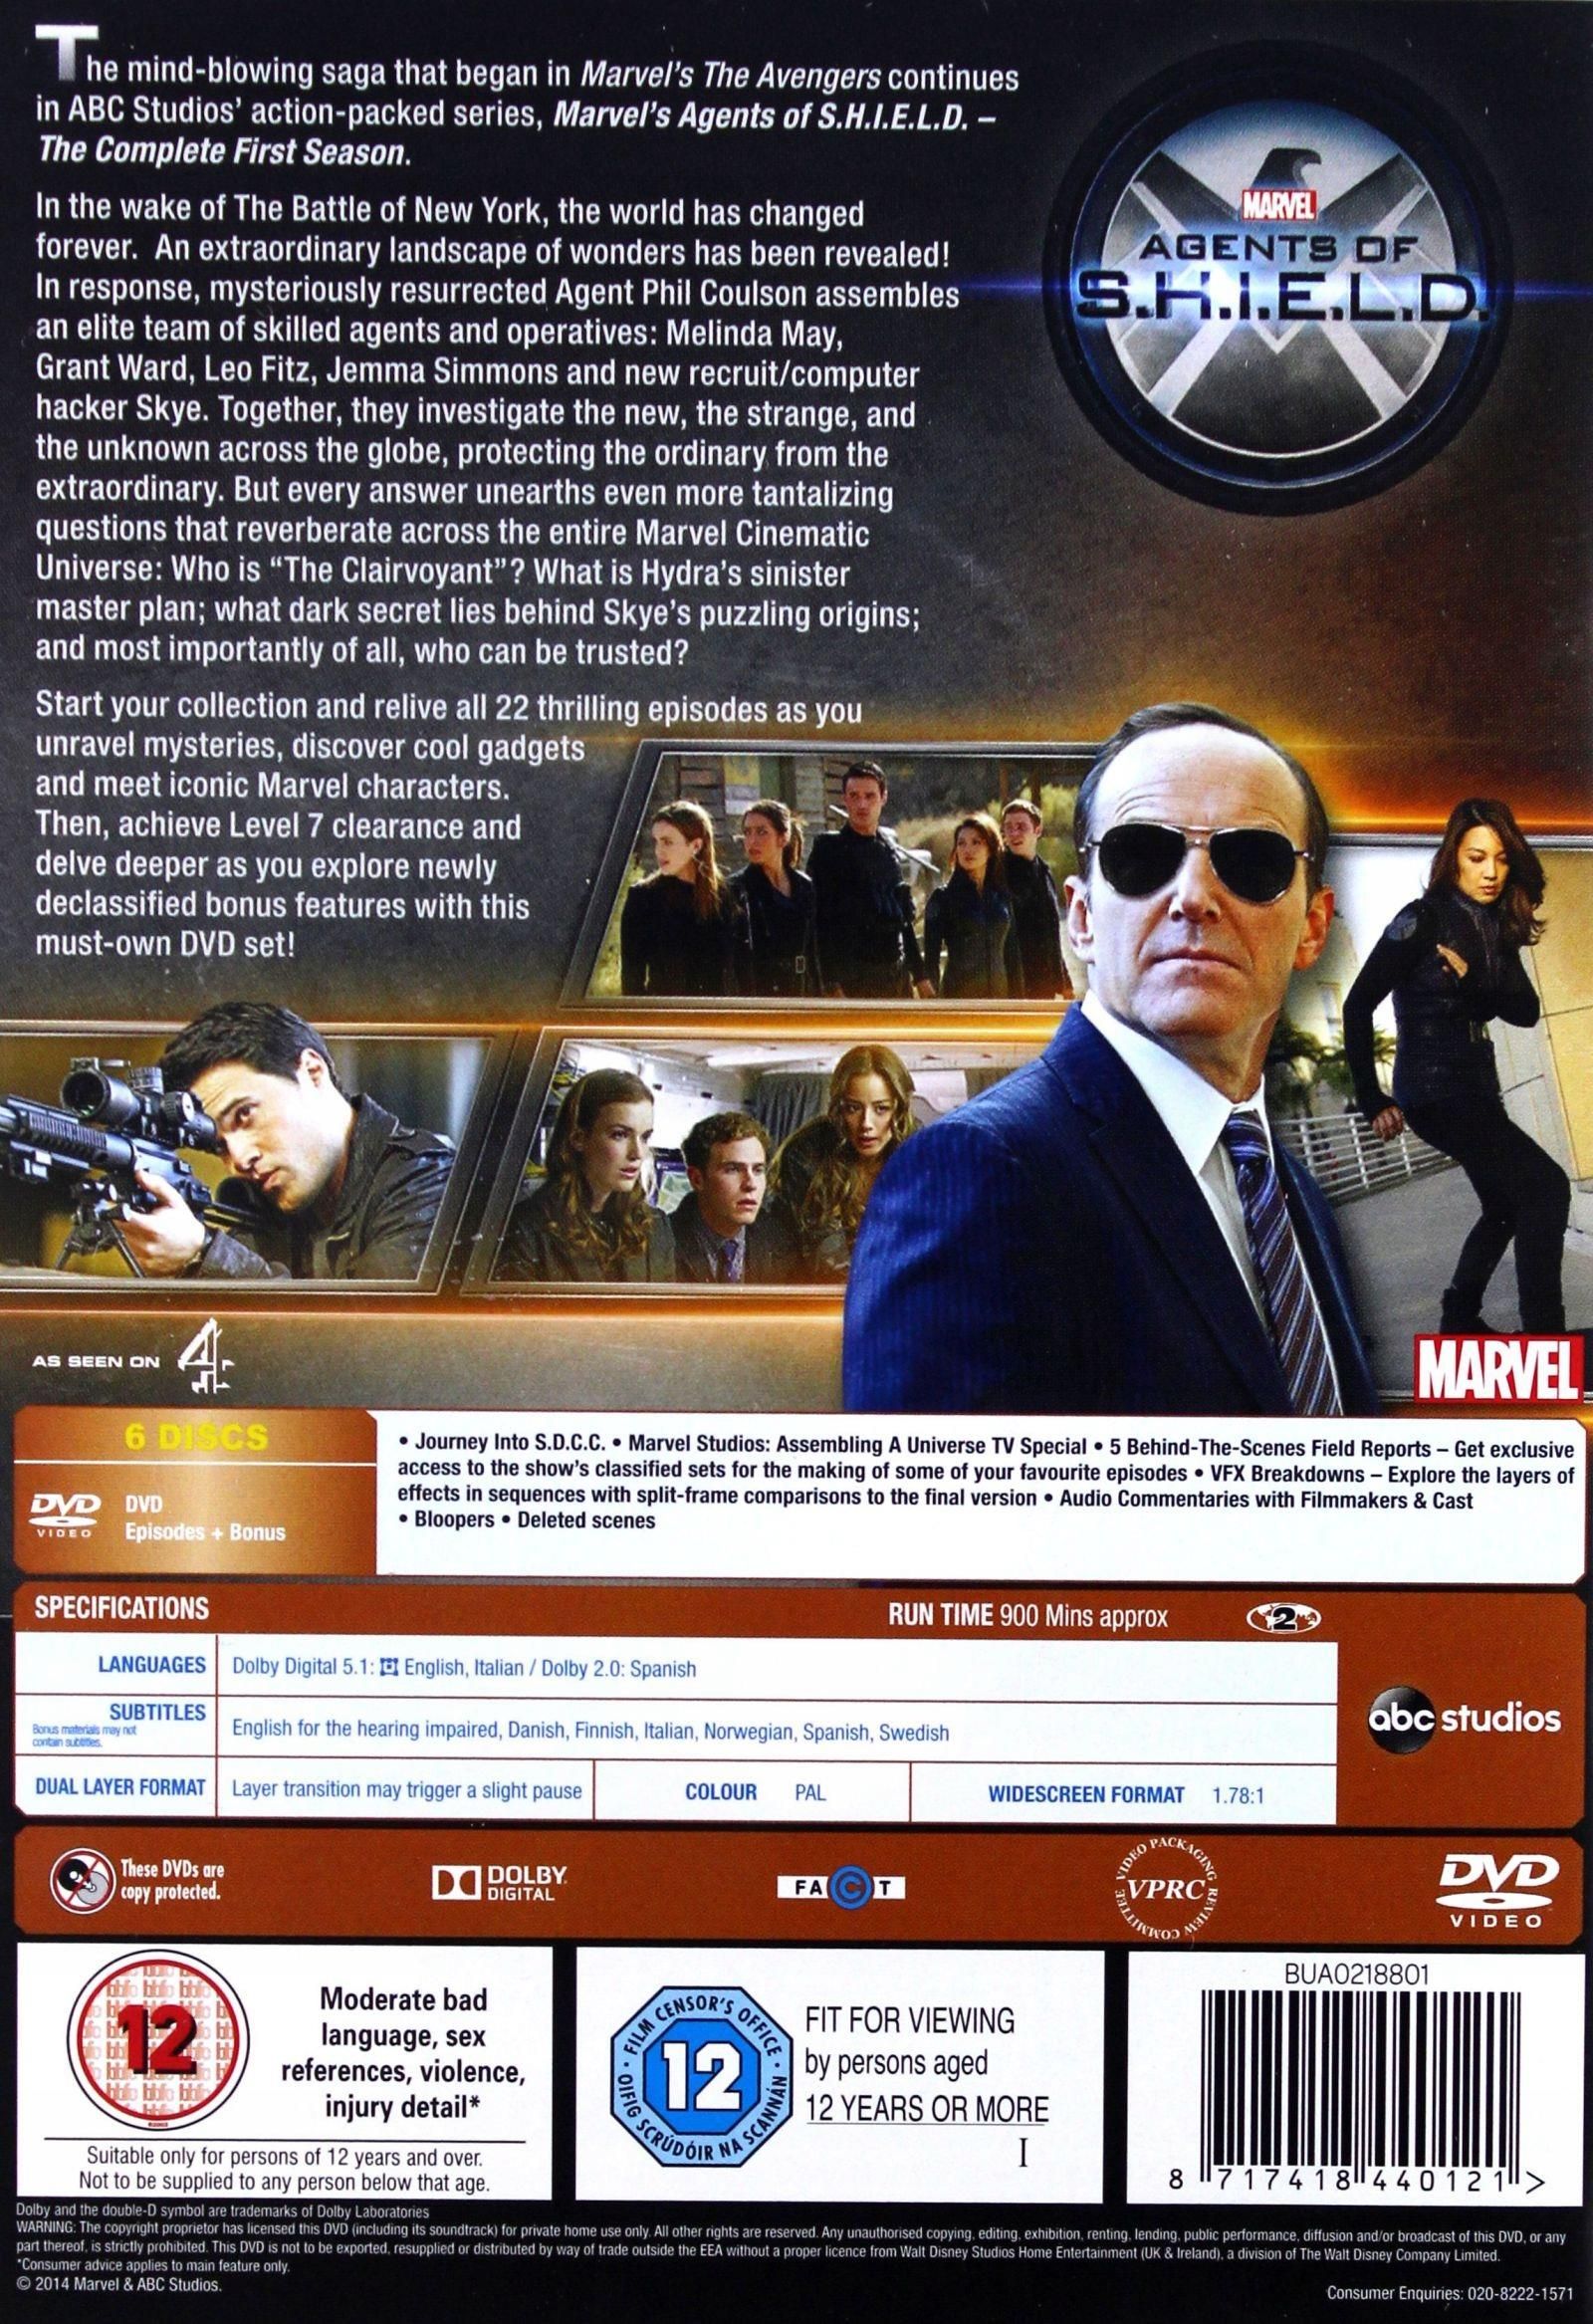 Marvel agents of shield season 1 full episodes download